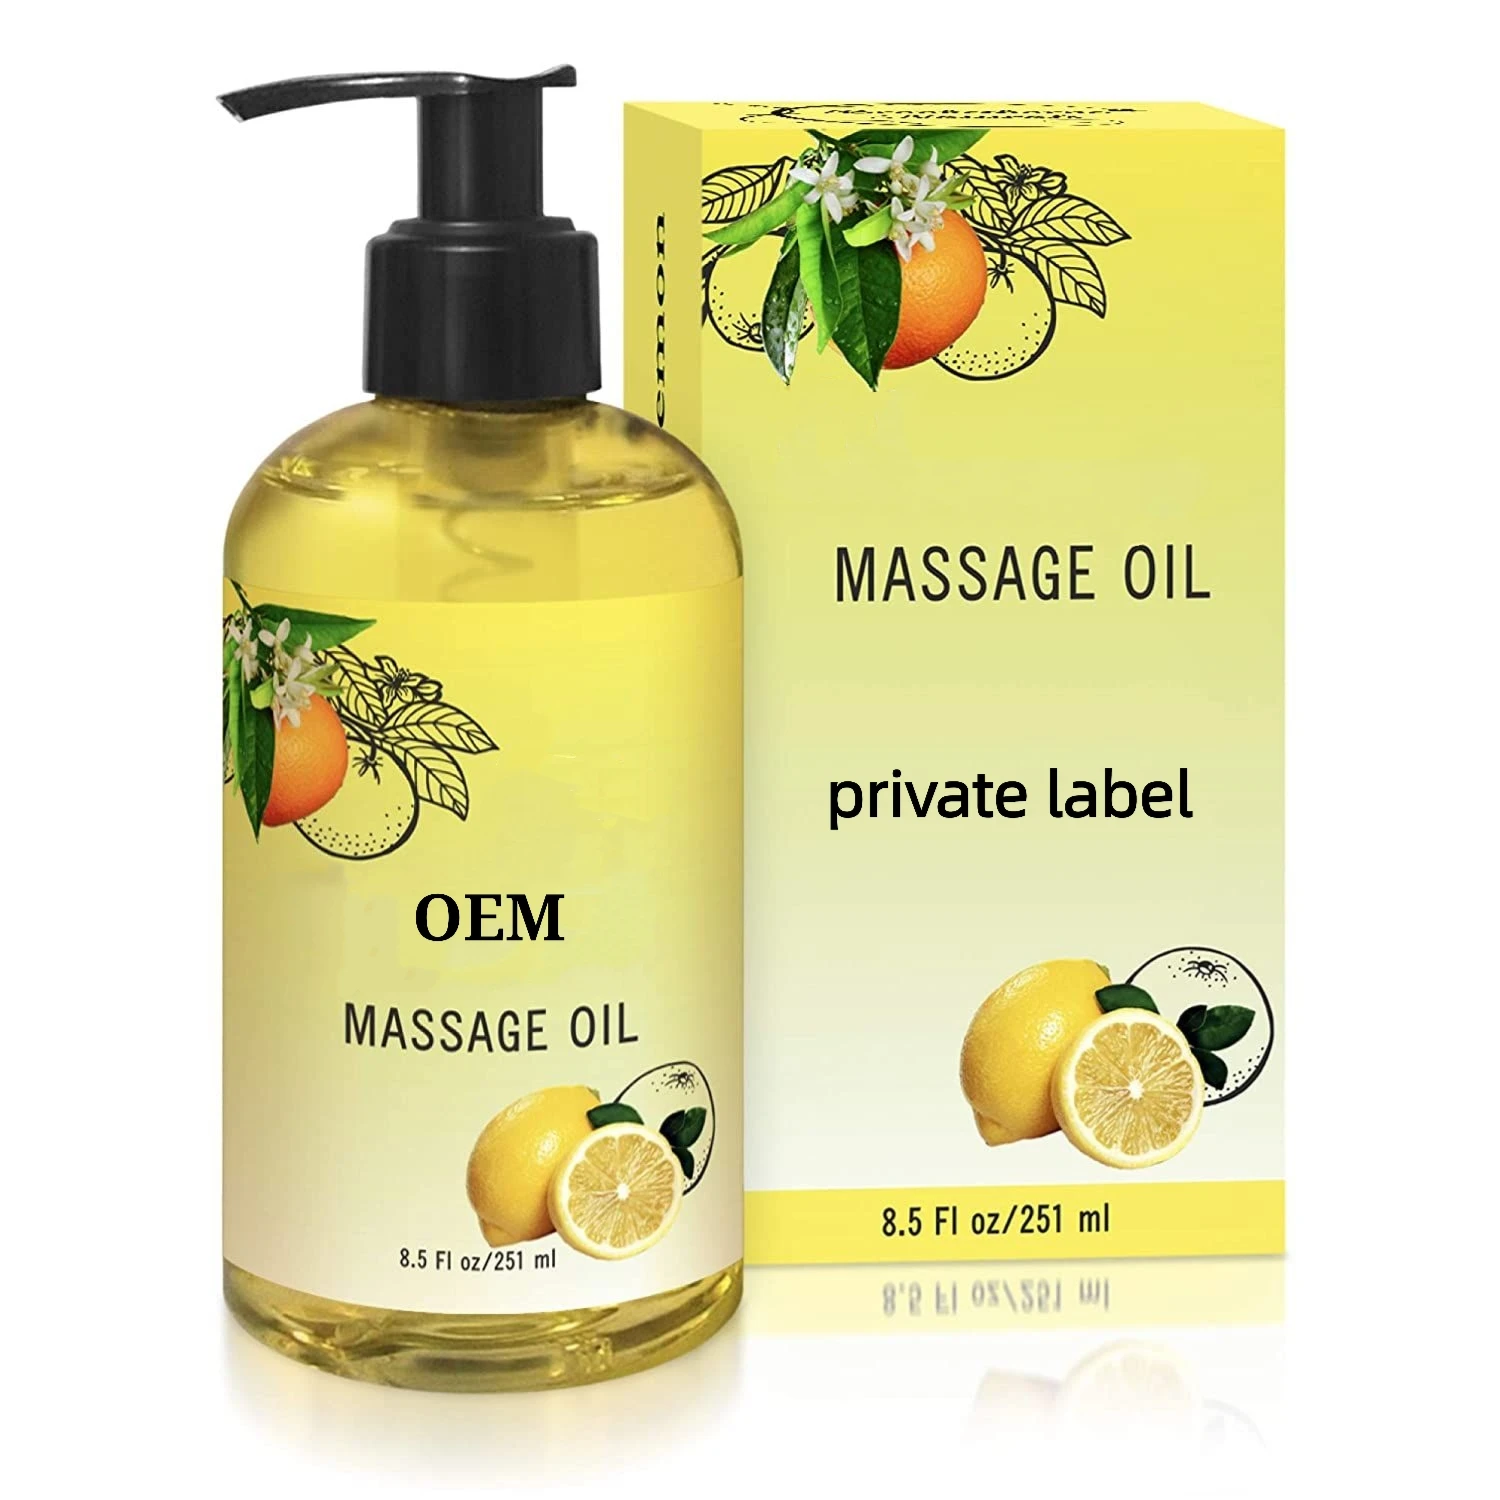 Oem Hot Oil Massage Japanese Private Label Organic Massage Oil To Make My Own Body Essential Oil 